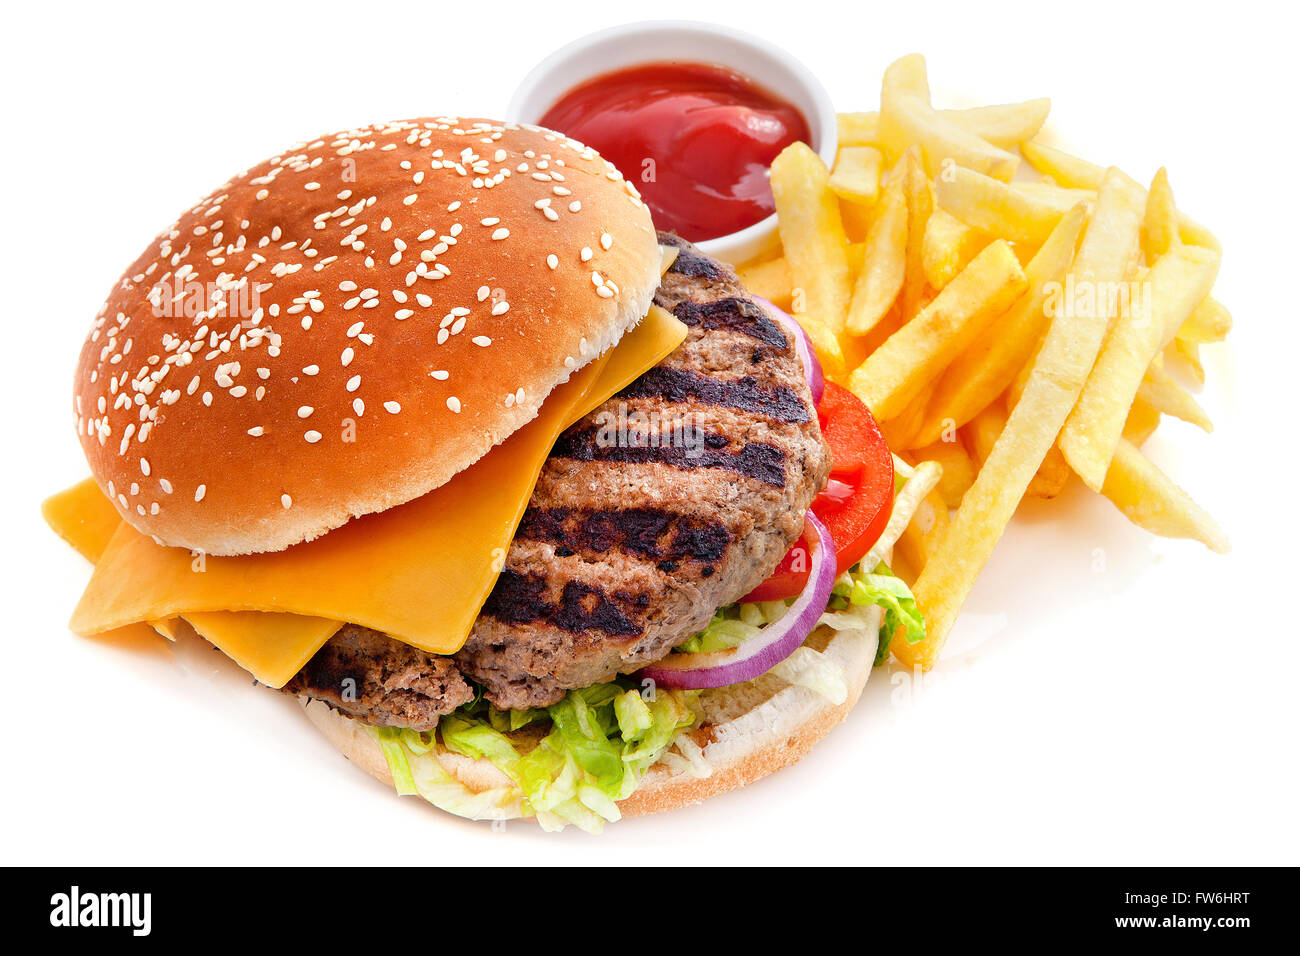 Cheeseburger with French fries Stock Photo